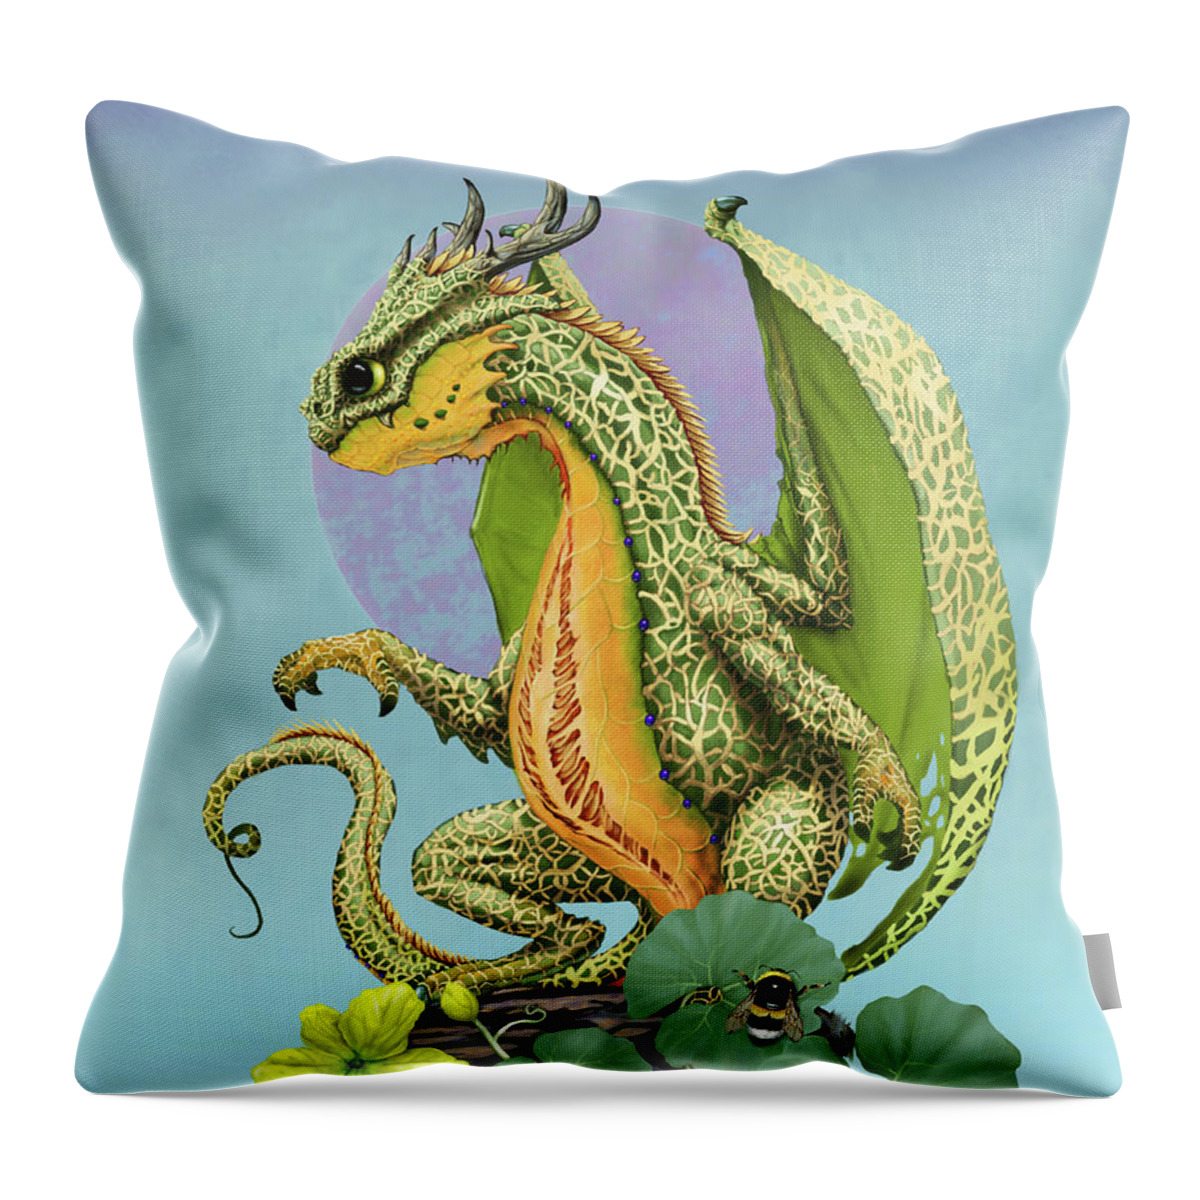 Cantaloupe Throw Pillow featuring the digital art Cantaloupe Dragon by Stanley Morrison